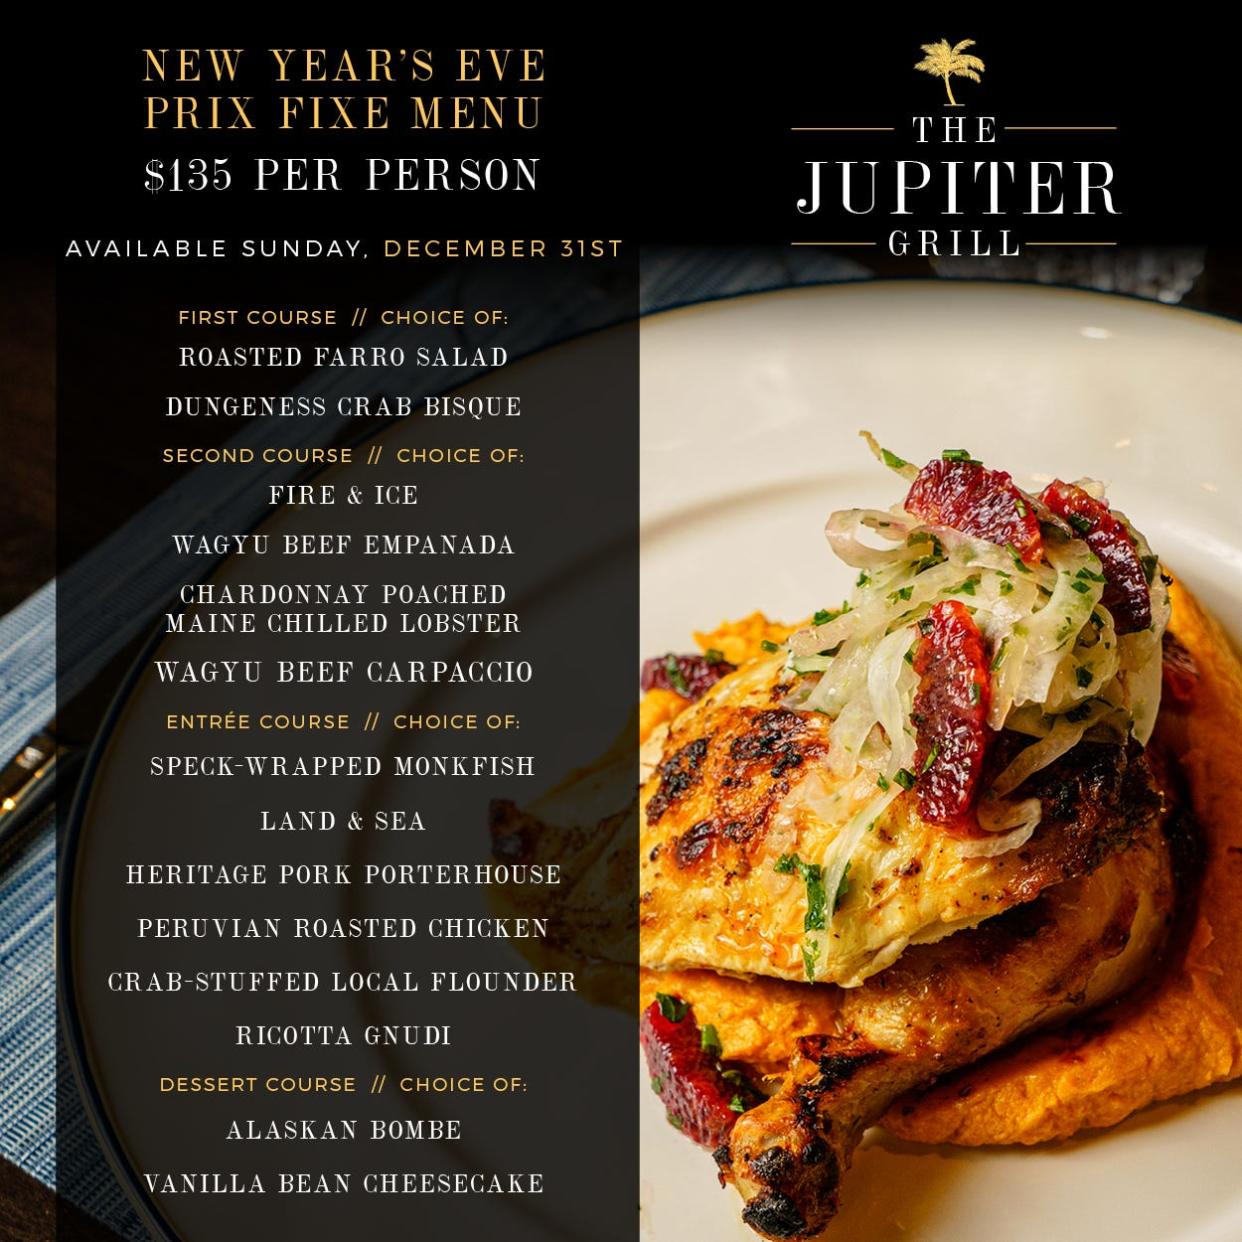 The Jupiter Grill will offer a prix fixe menu this New Year's Eve curated by celebrity chef and Hell's Kitchen winner Paul Niedermann.